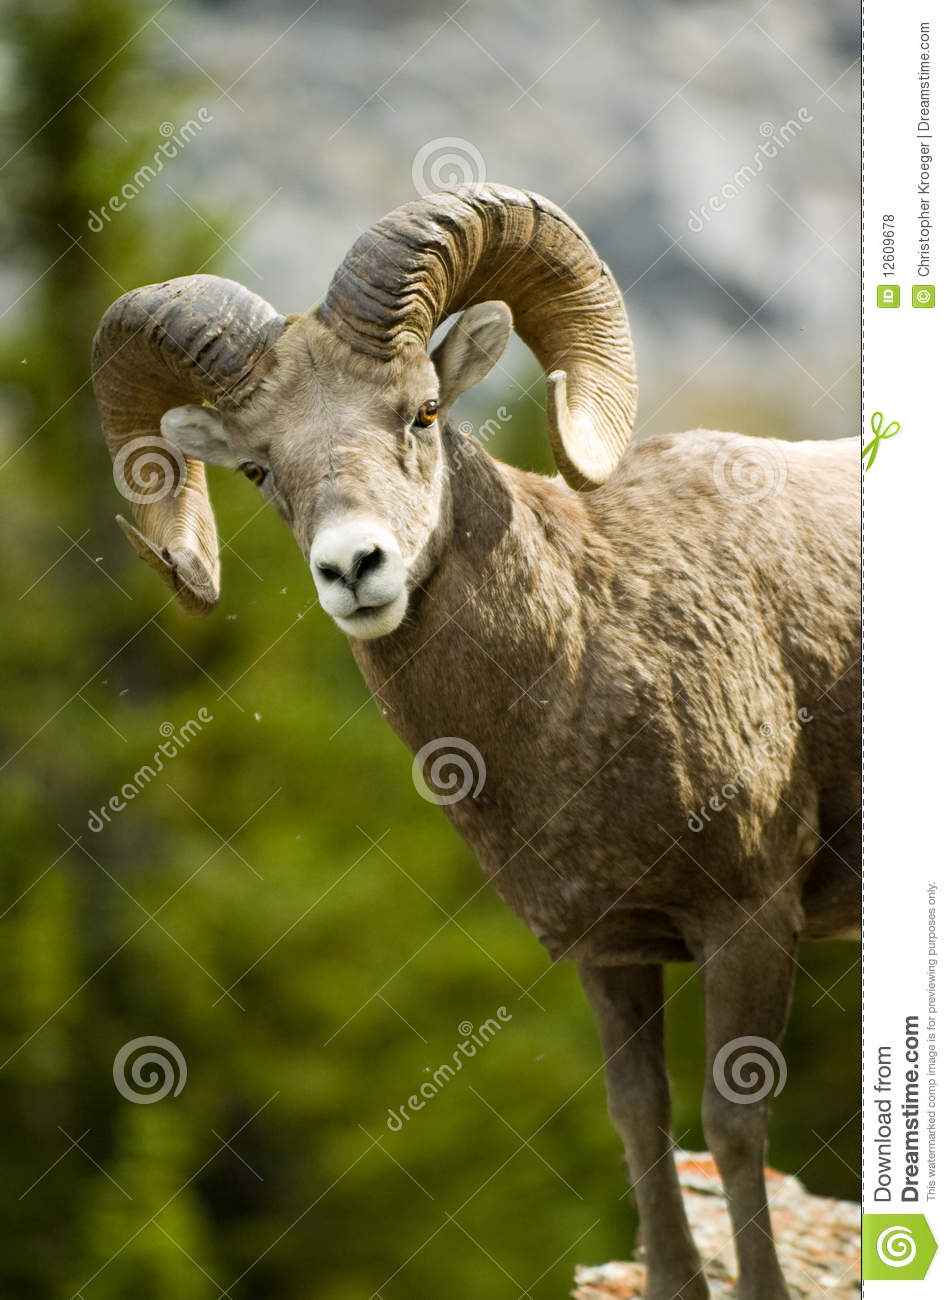 Male Big Horn Sheep Royalty Free Stock Photos   Image  12609678